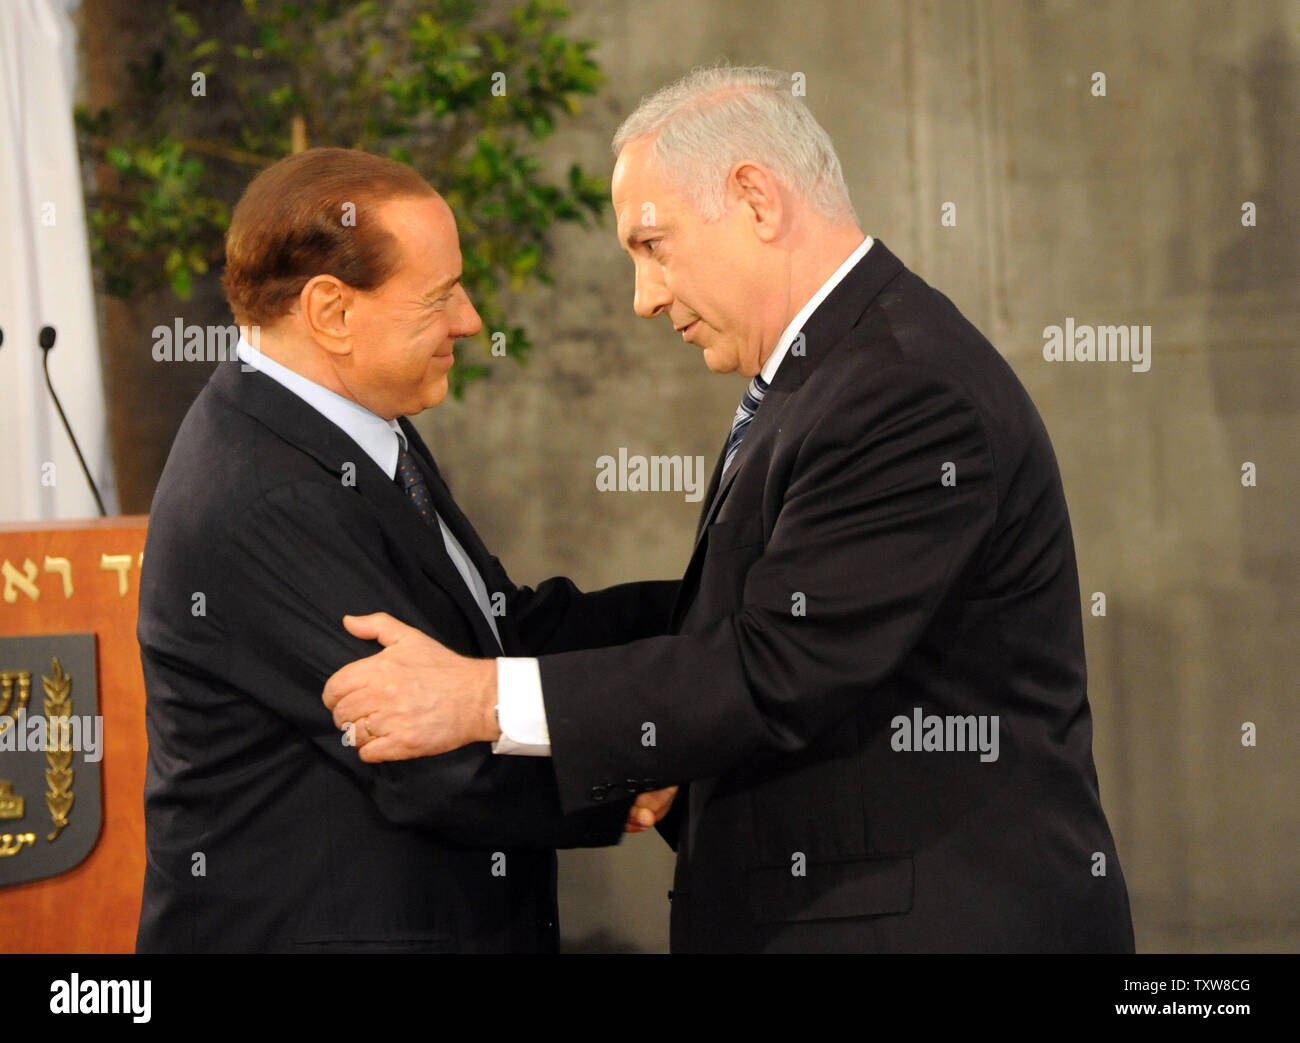 L-R:  Italian Prime Minister Silvio Berlusconi greets Israeli Prime Minister Benjamin Netanyahu during a welcoming ceremony at Netanyahu's Jerusalem office, February 1, 2010. Prime Minister Berlusconi is in Israel for a three- day visit.   UPI/Debbie Hill Stock Photo